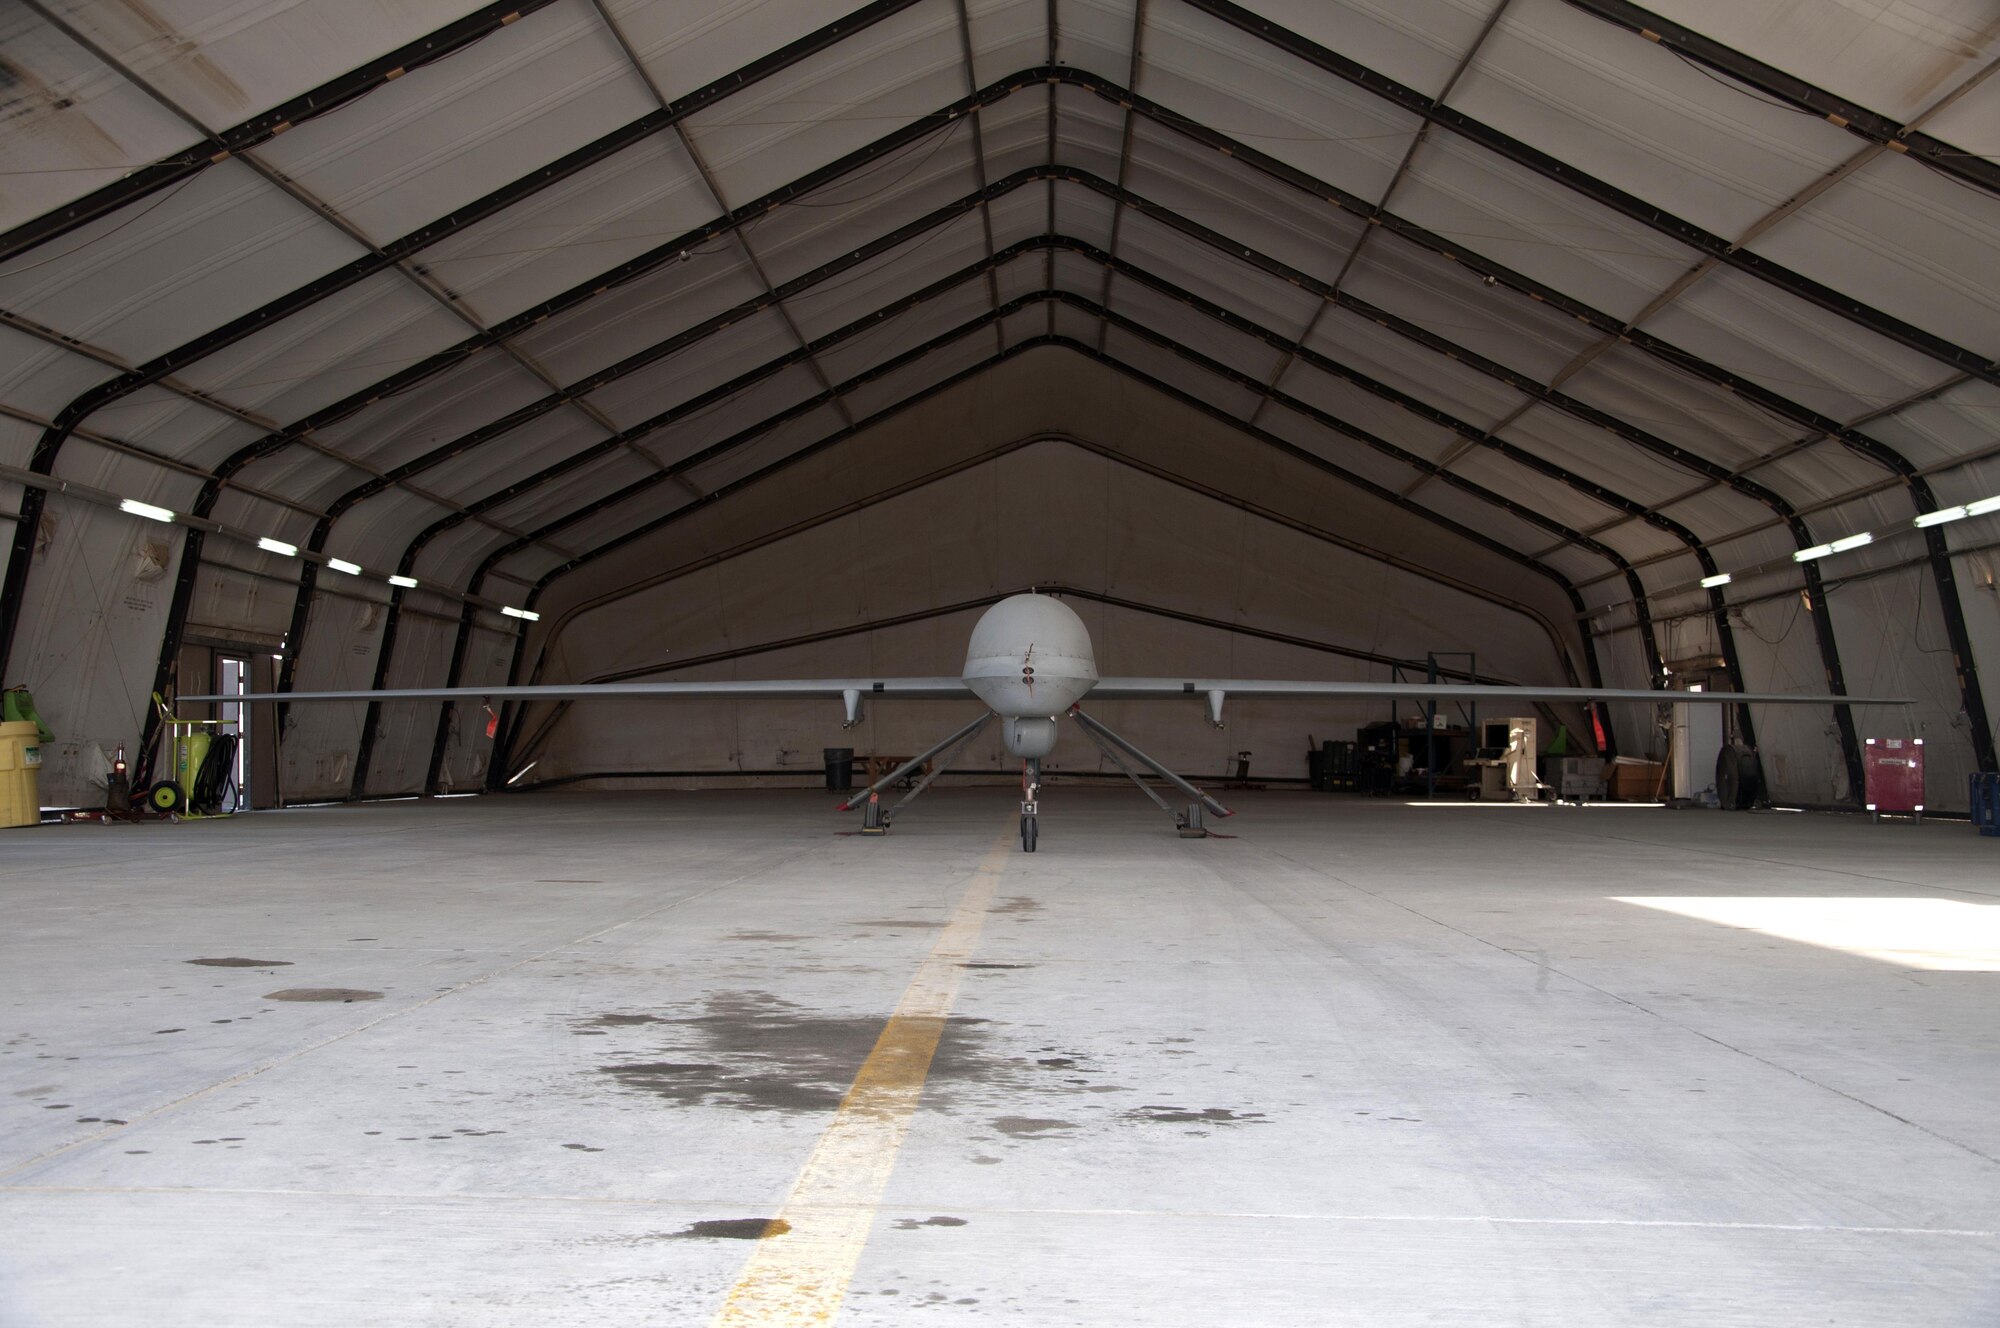 A MQ-1 Predator sits in the hangar in an undisclosed location in Southwest Asia, Oct. 20, 2016. The 386th Air Expeditionary Wing beds down and supports the MQ-1 in order to gather intelligence, surveillance and reconnaissance, and perform strike missions. (U.S. Air Force photo by Master Sgt. Anika Jones/Released)